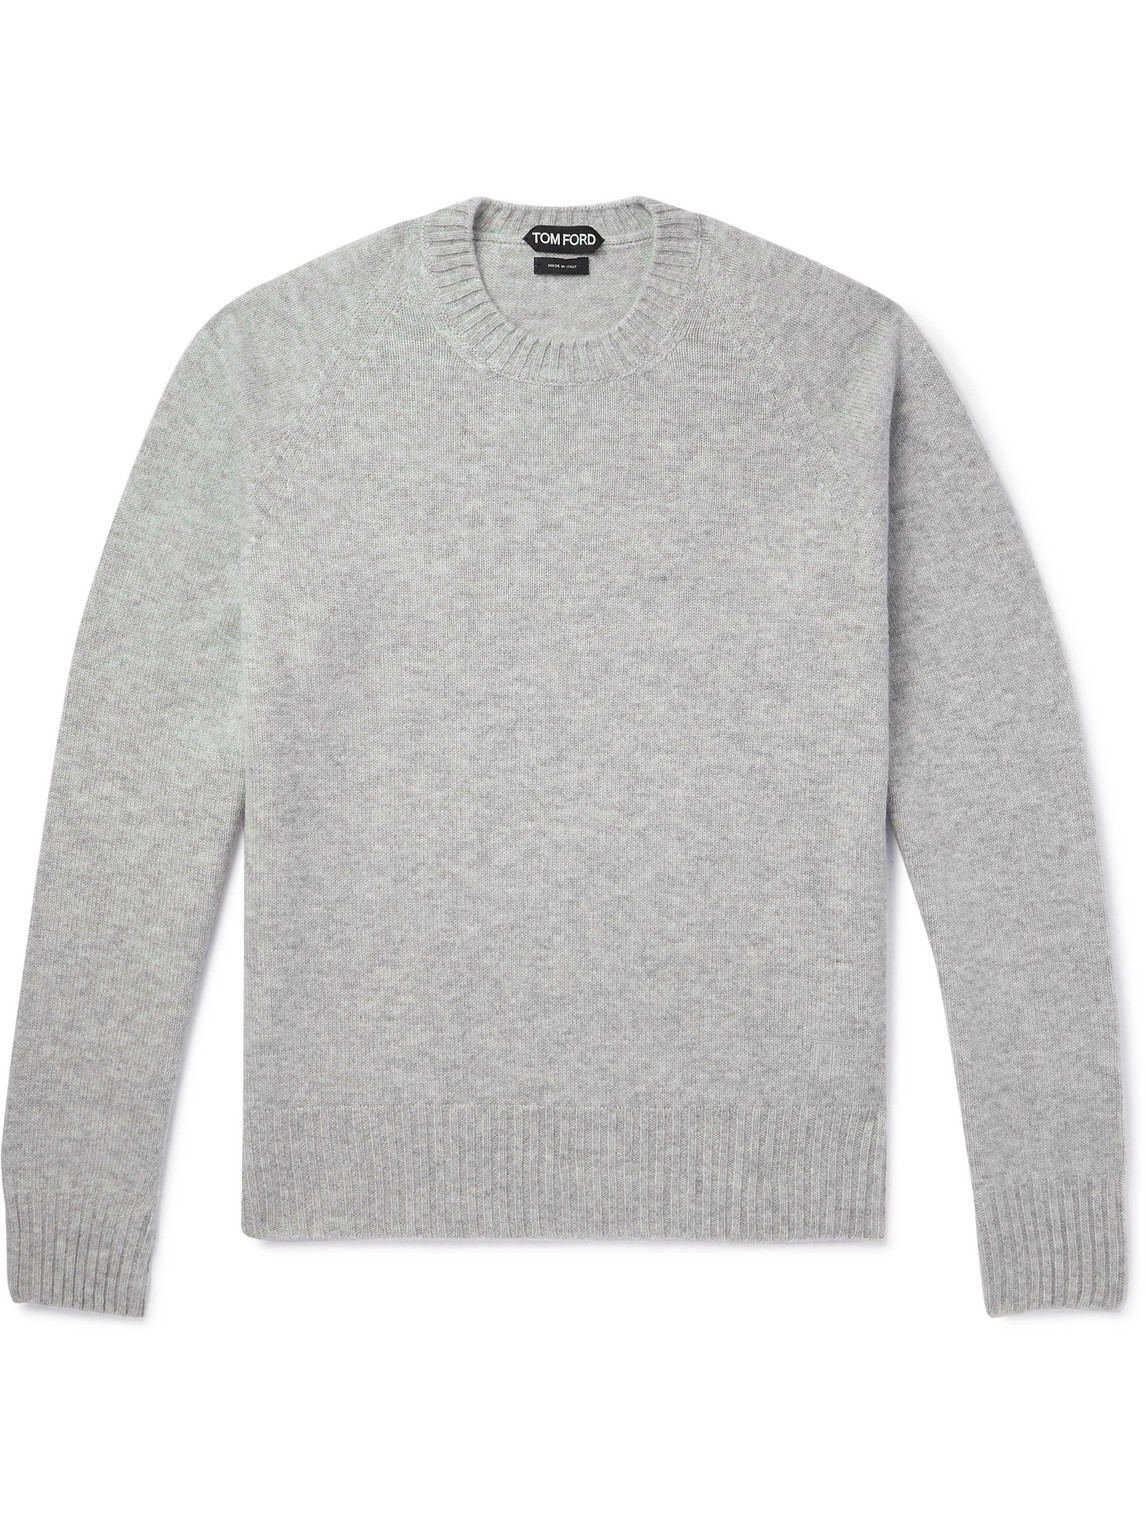 Tom Ford Cashmere Sweater In Gray